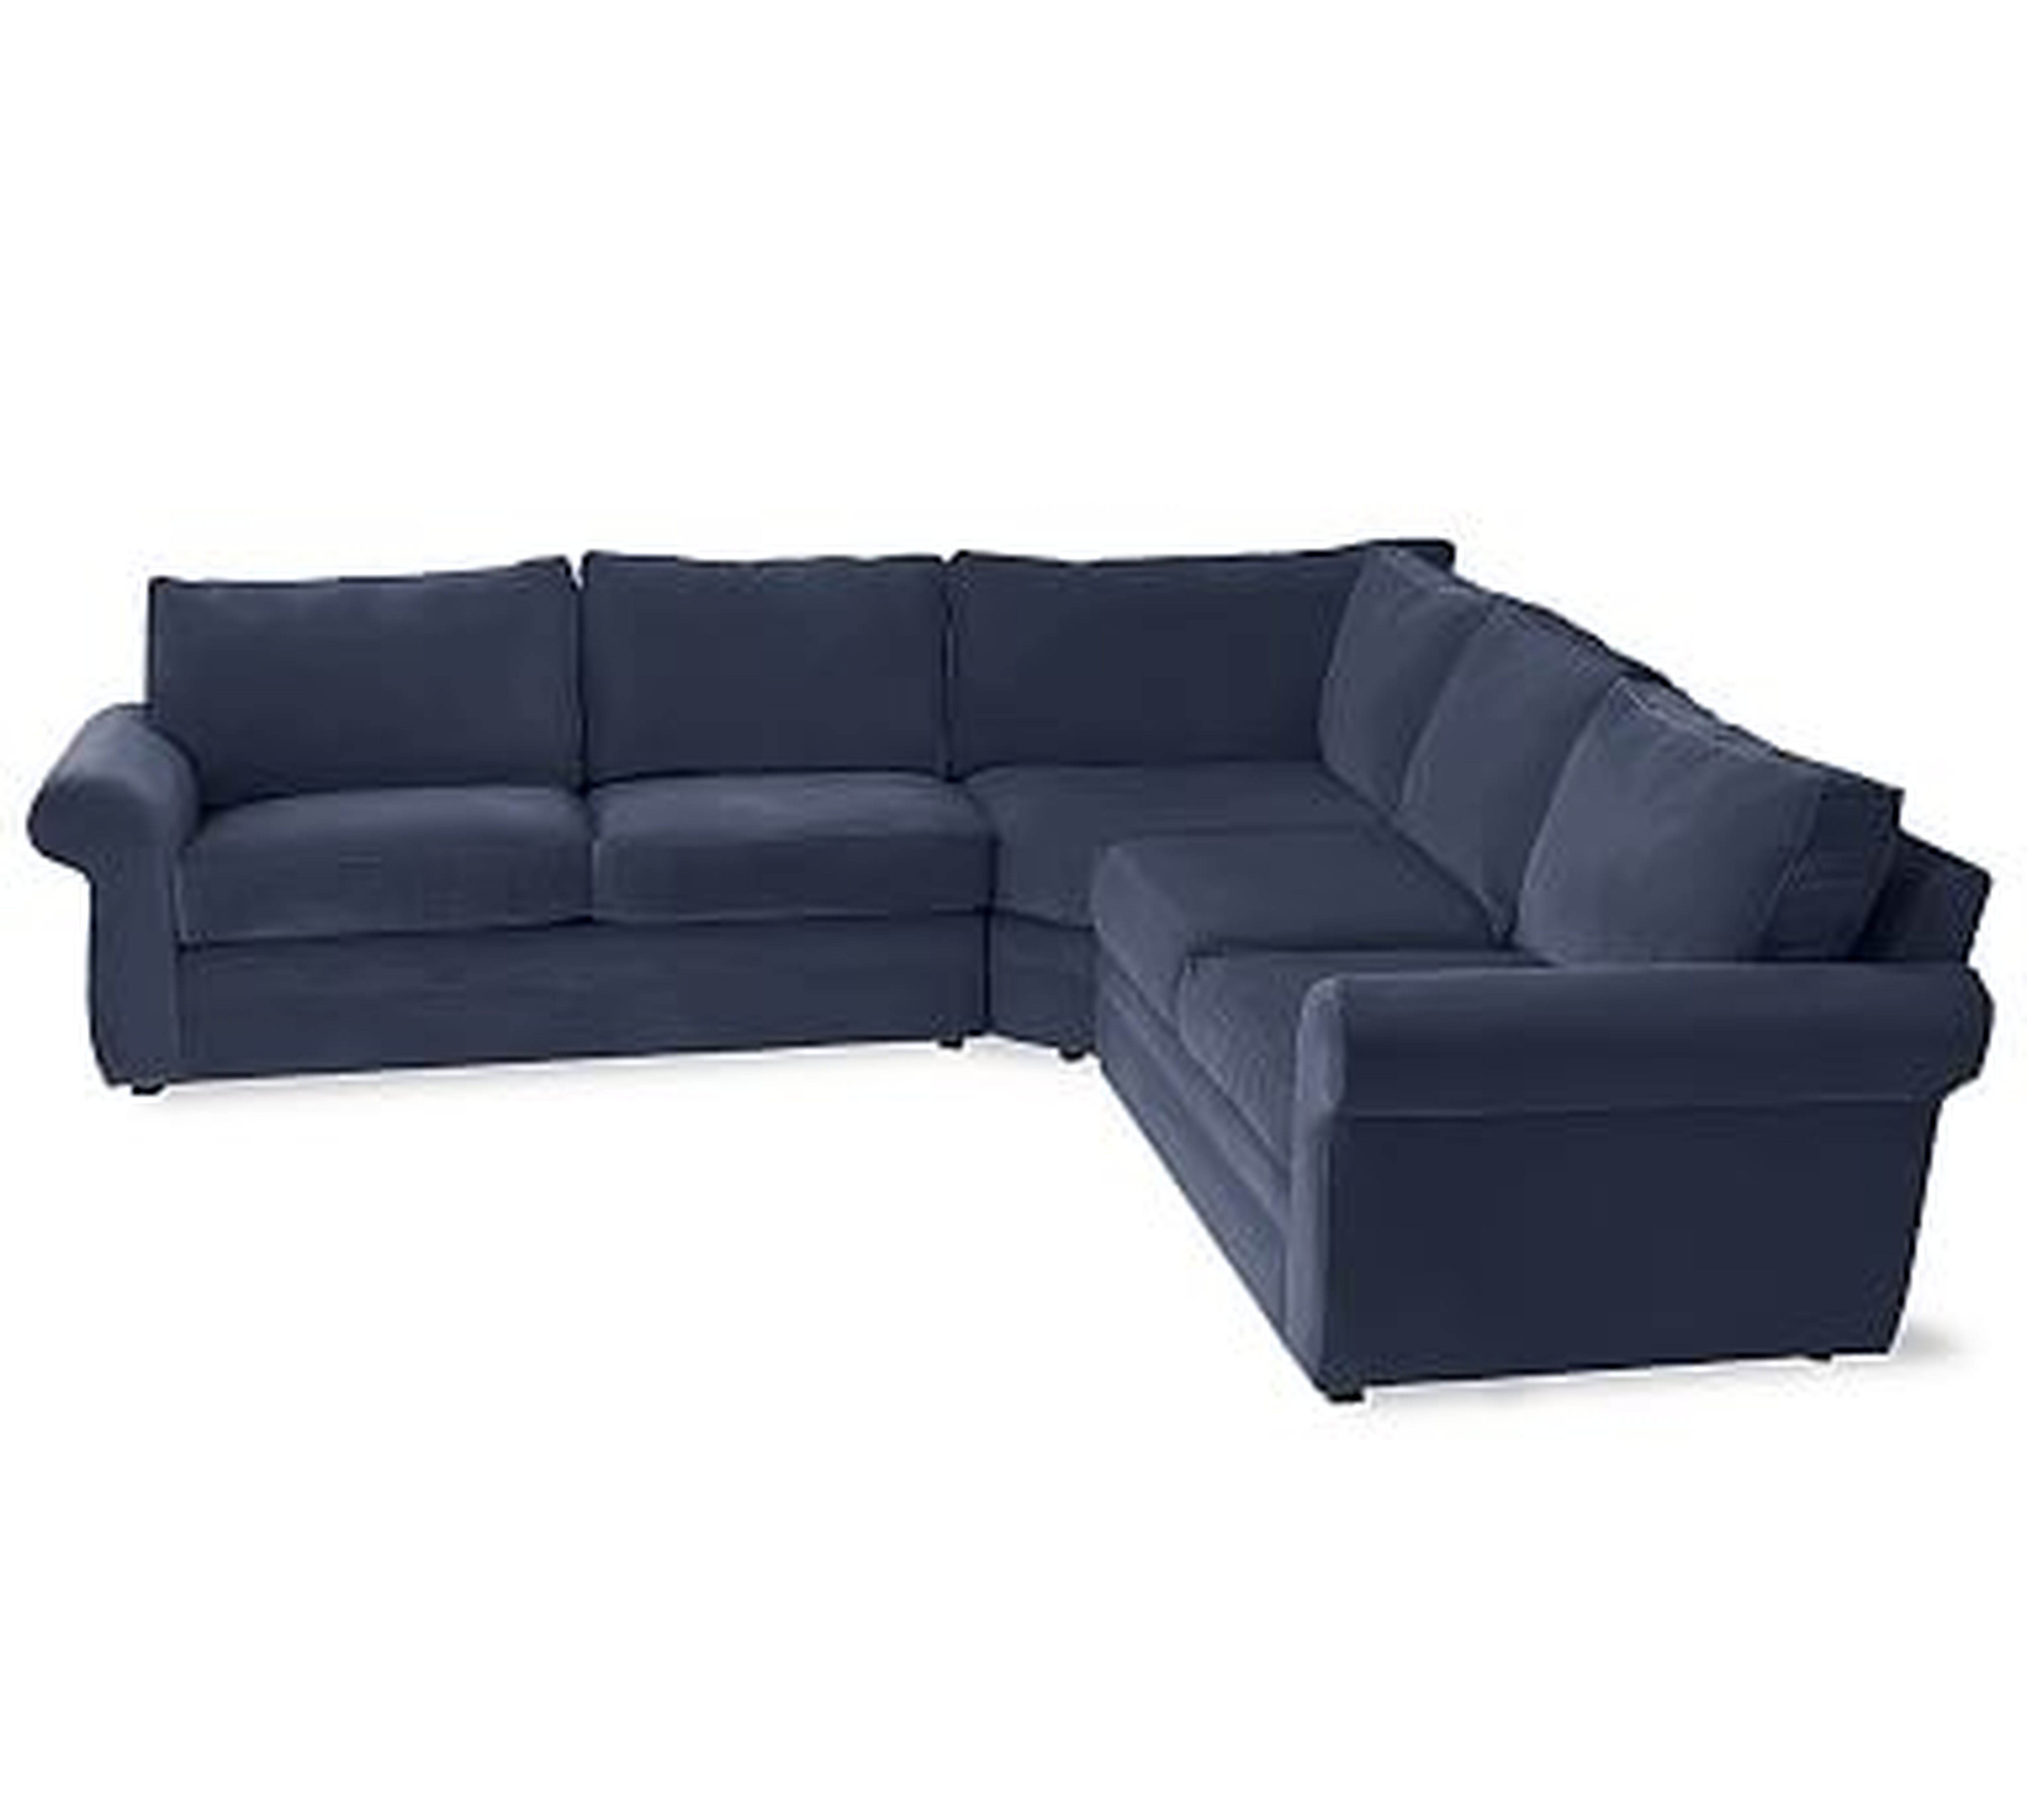 Pearce Roll Arm Upholstered 3-Piece L-Shaped Wedge Sectional, Down Blend Wrapped Cushions, Twill Cadet Navy - Pottery Barn